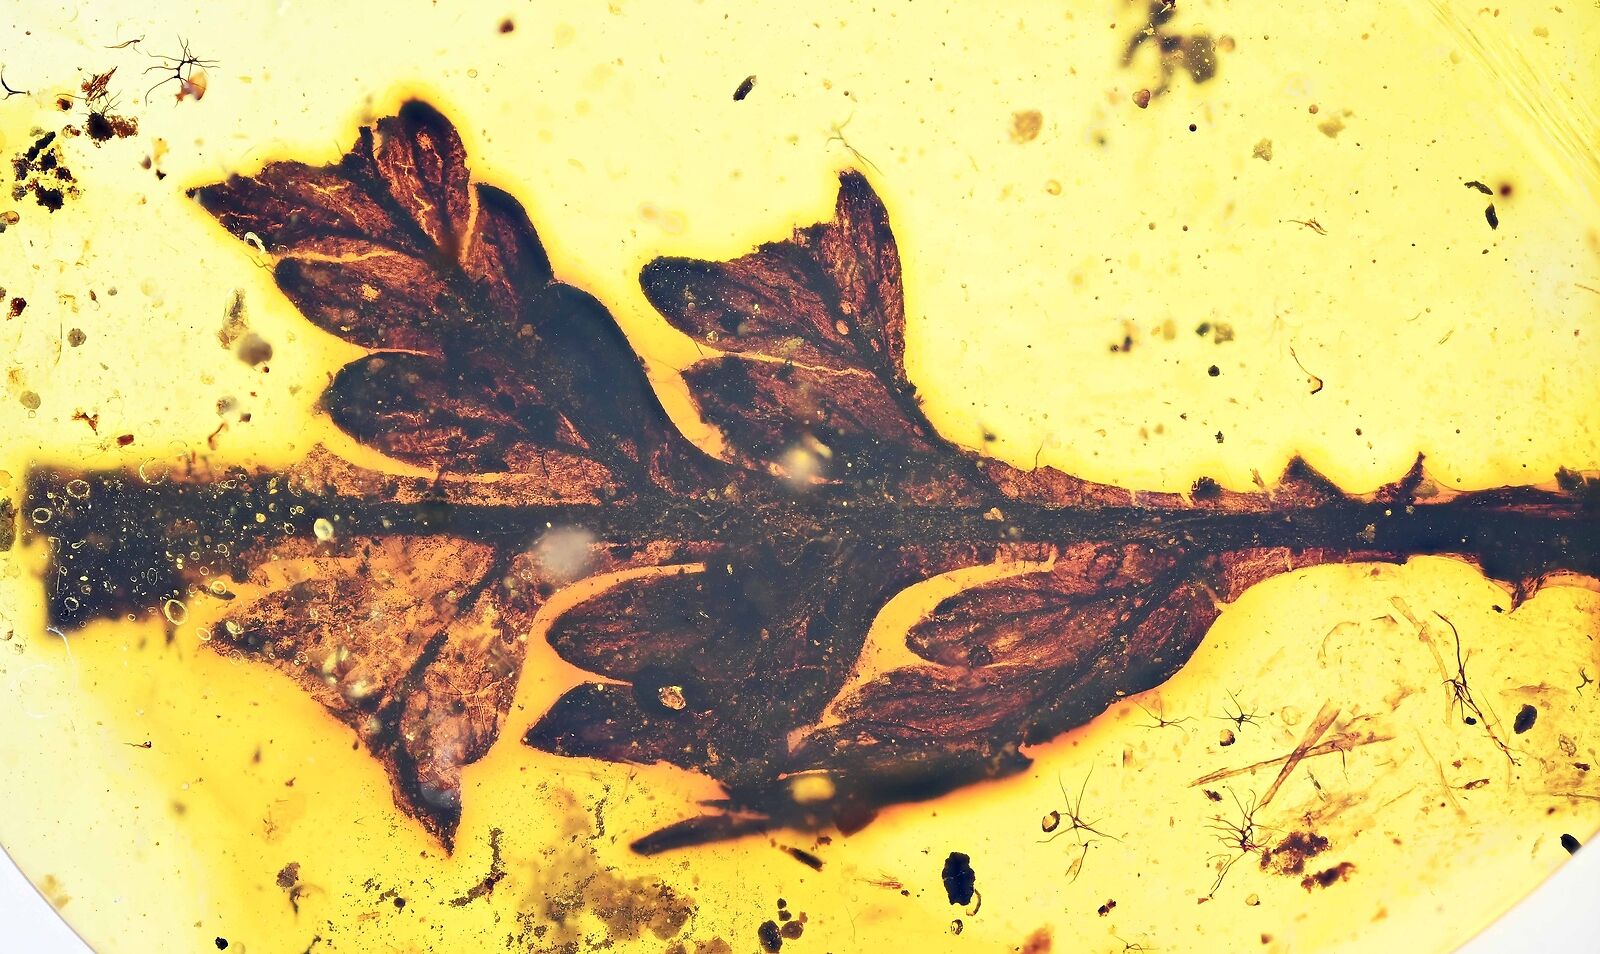 Rare Superb Leaf, Fossil inclusion in Burmese Amber